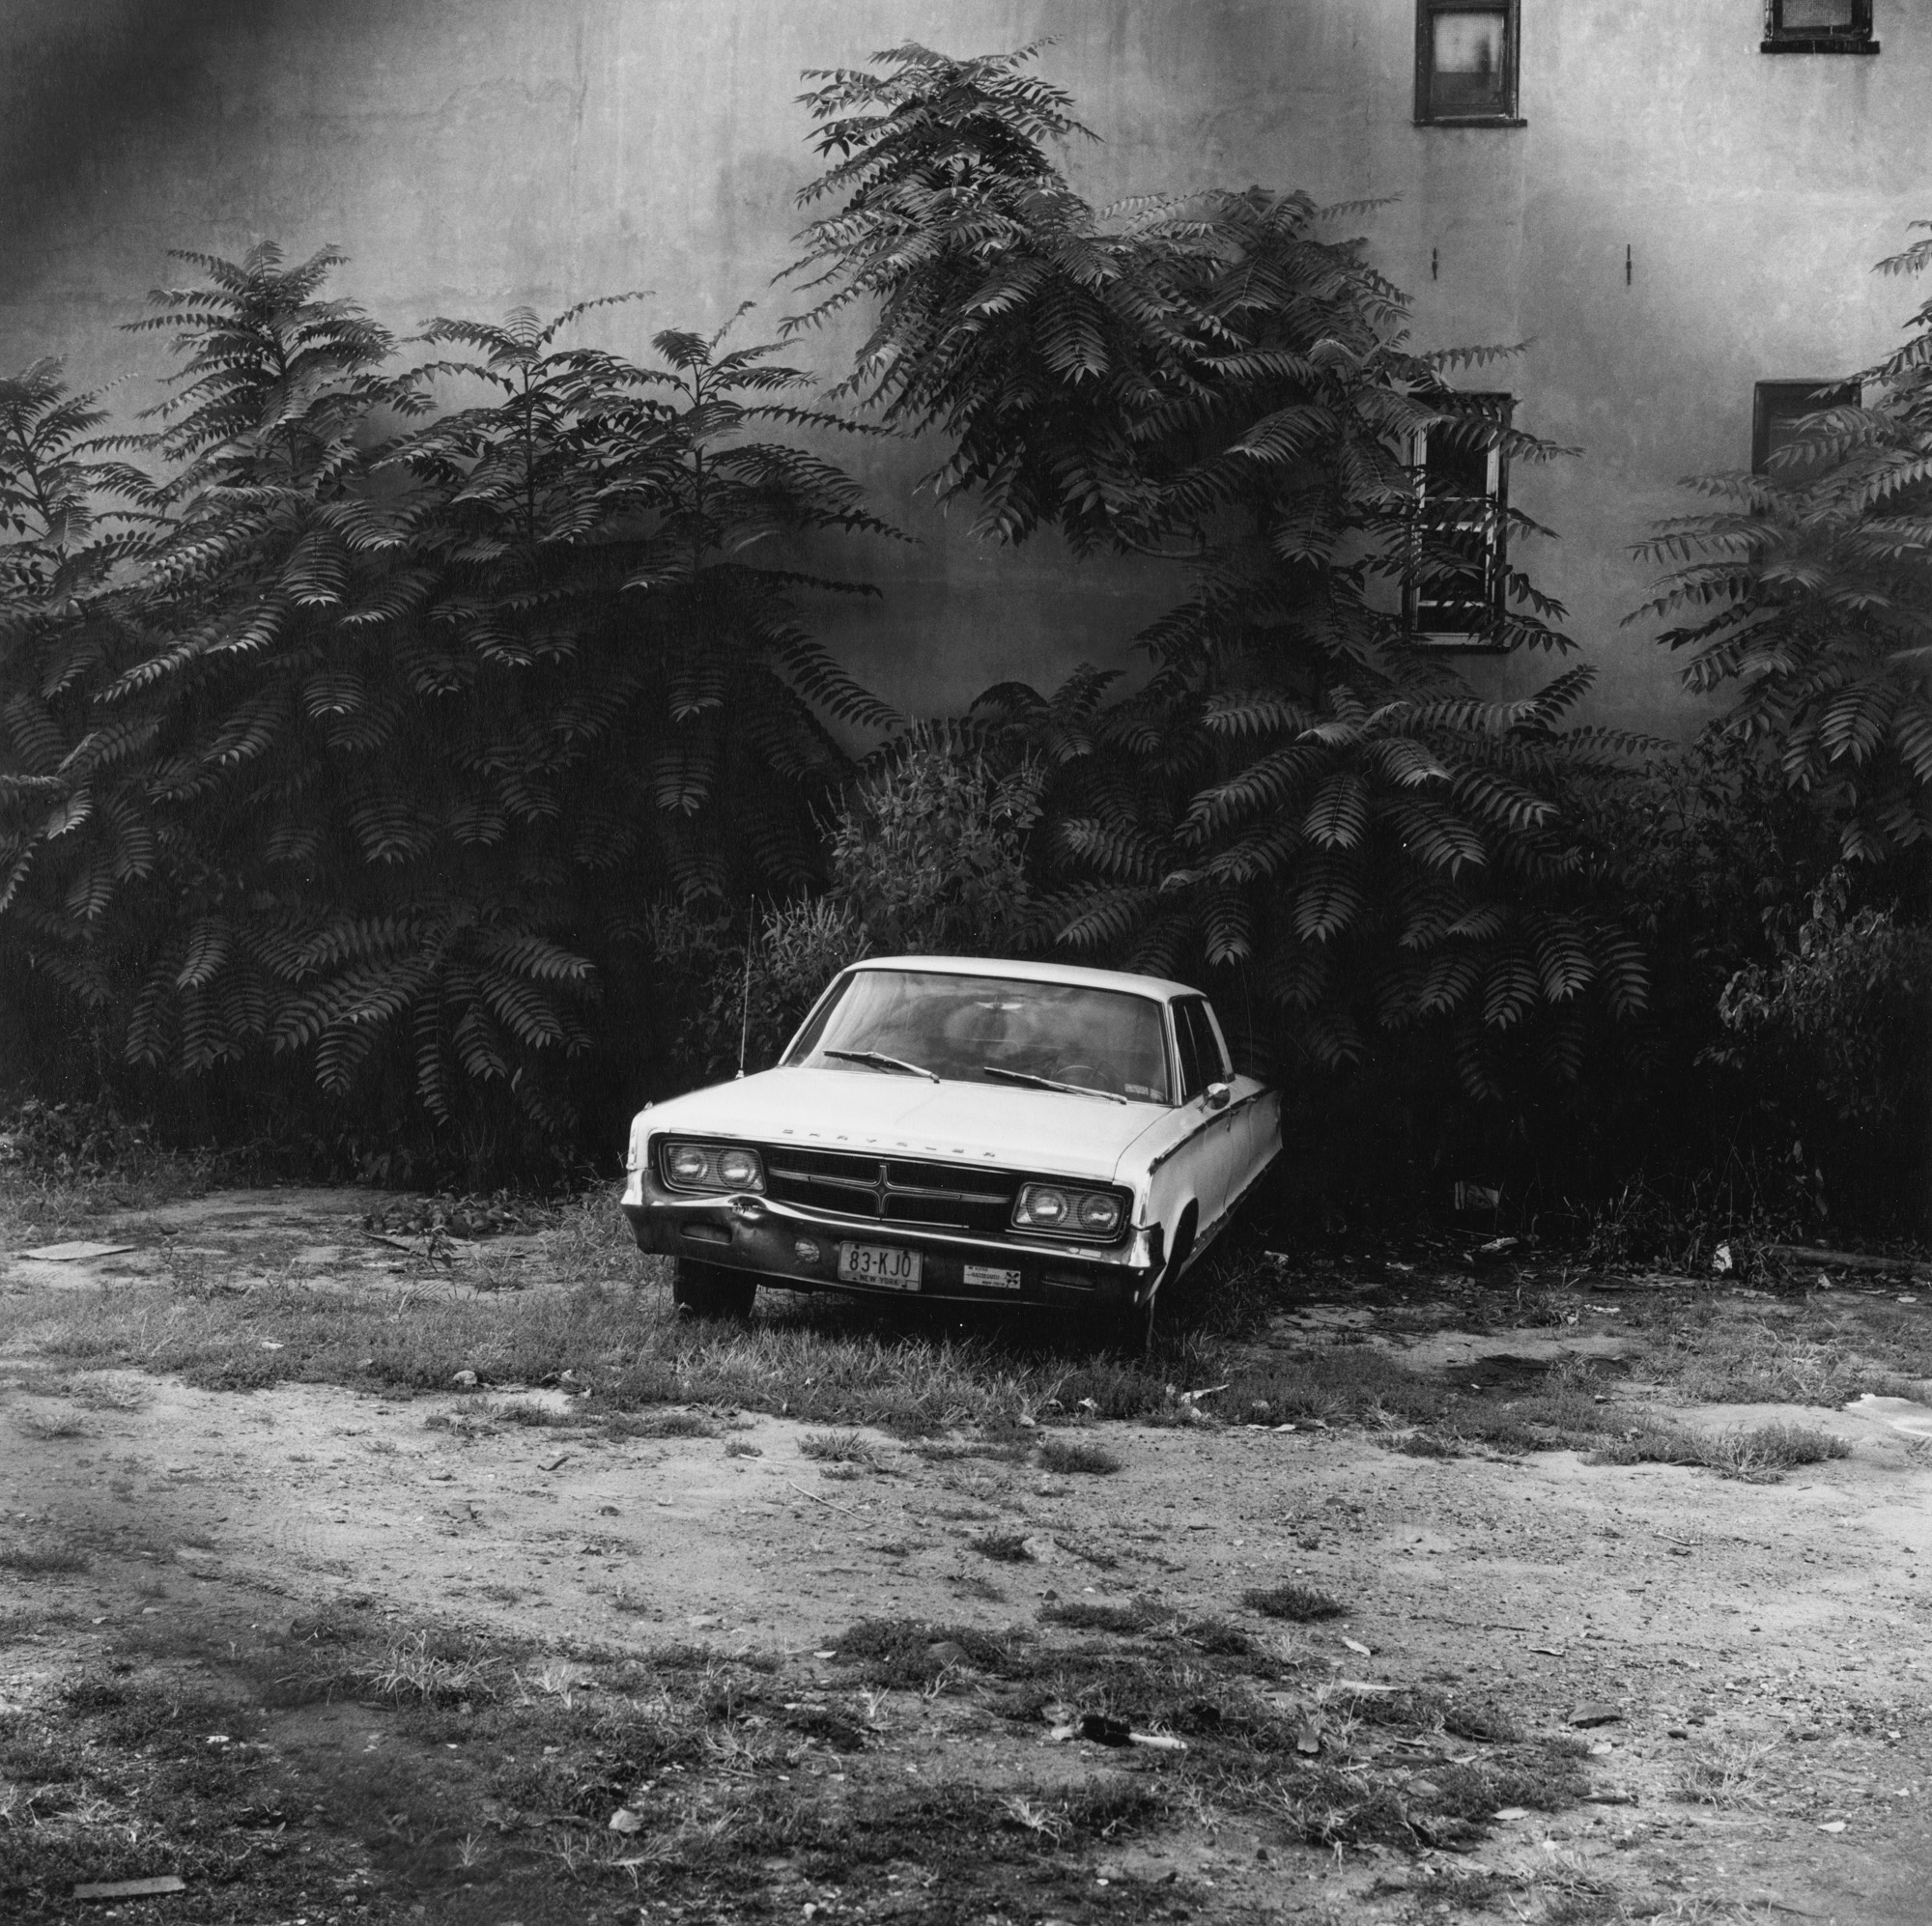 Black and white photograph of an abandoned car in a lot with trees and shrubs next to apartment building